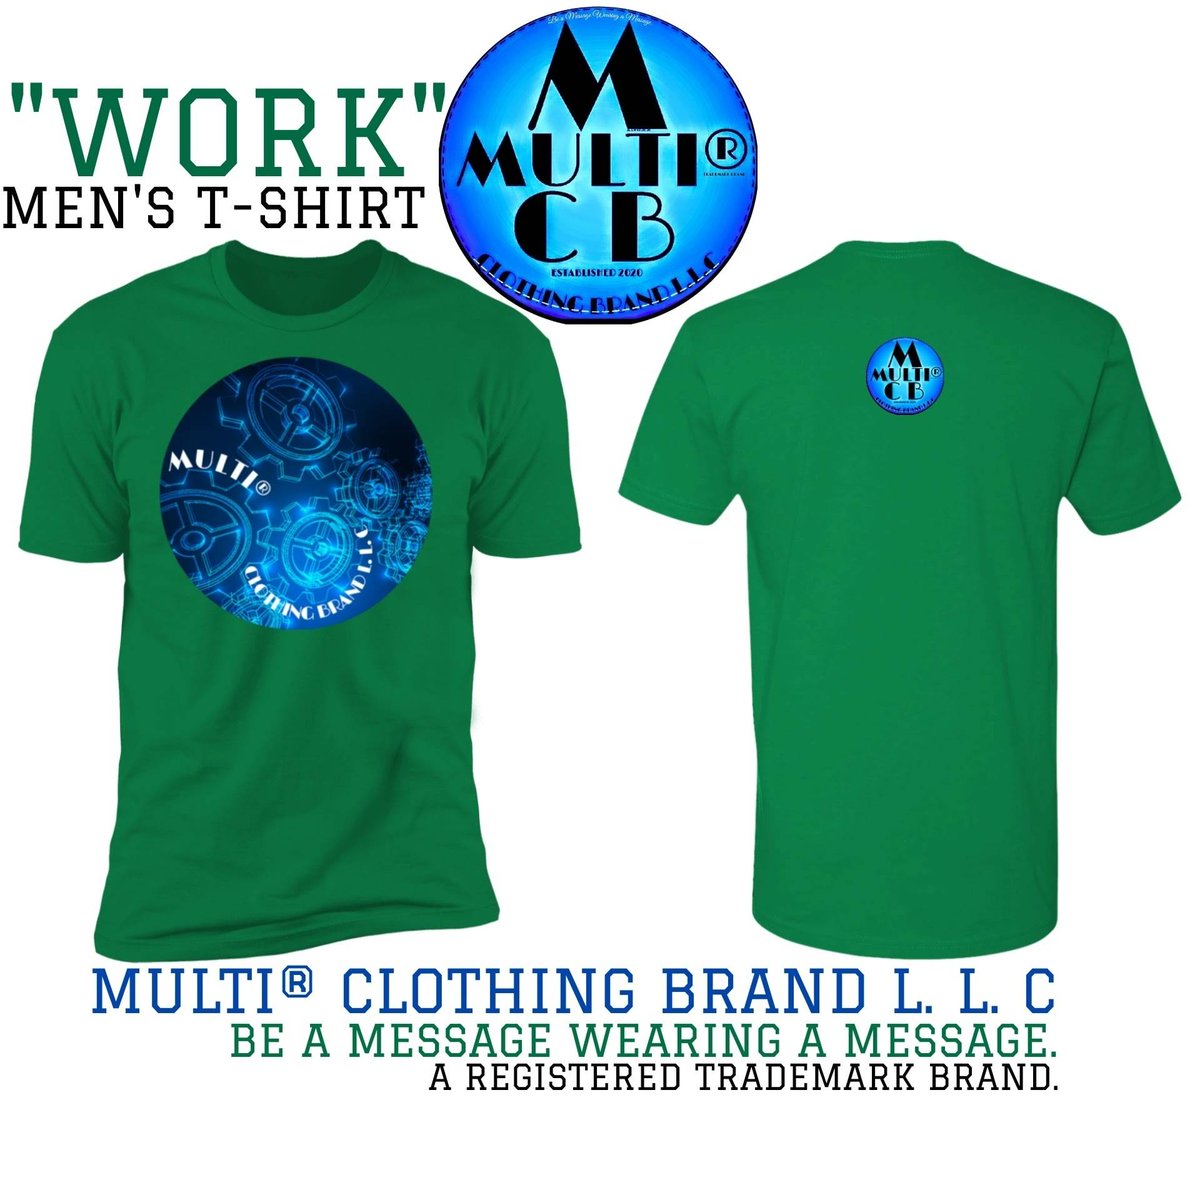 MULTI® CLOTHING BRAND L.L.C
'WORK'
MEN'S T-SHIRT
GET YOURS

BE
A
MESSAGE
WEARING
A
MESSAGE.
A REGISTERED TRADEMARK BRAND.
#multiclothingbrand #printedtshirts #menclothing #womenclothing #original #multi #clothing #brand #official #newjersey #dope #alternativehiphop